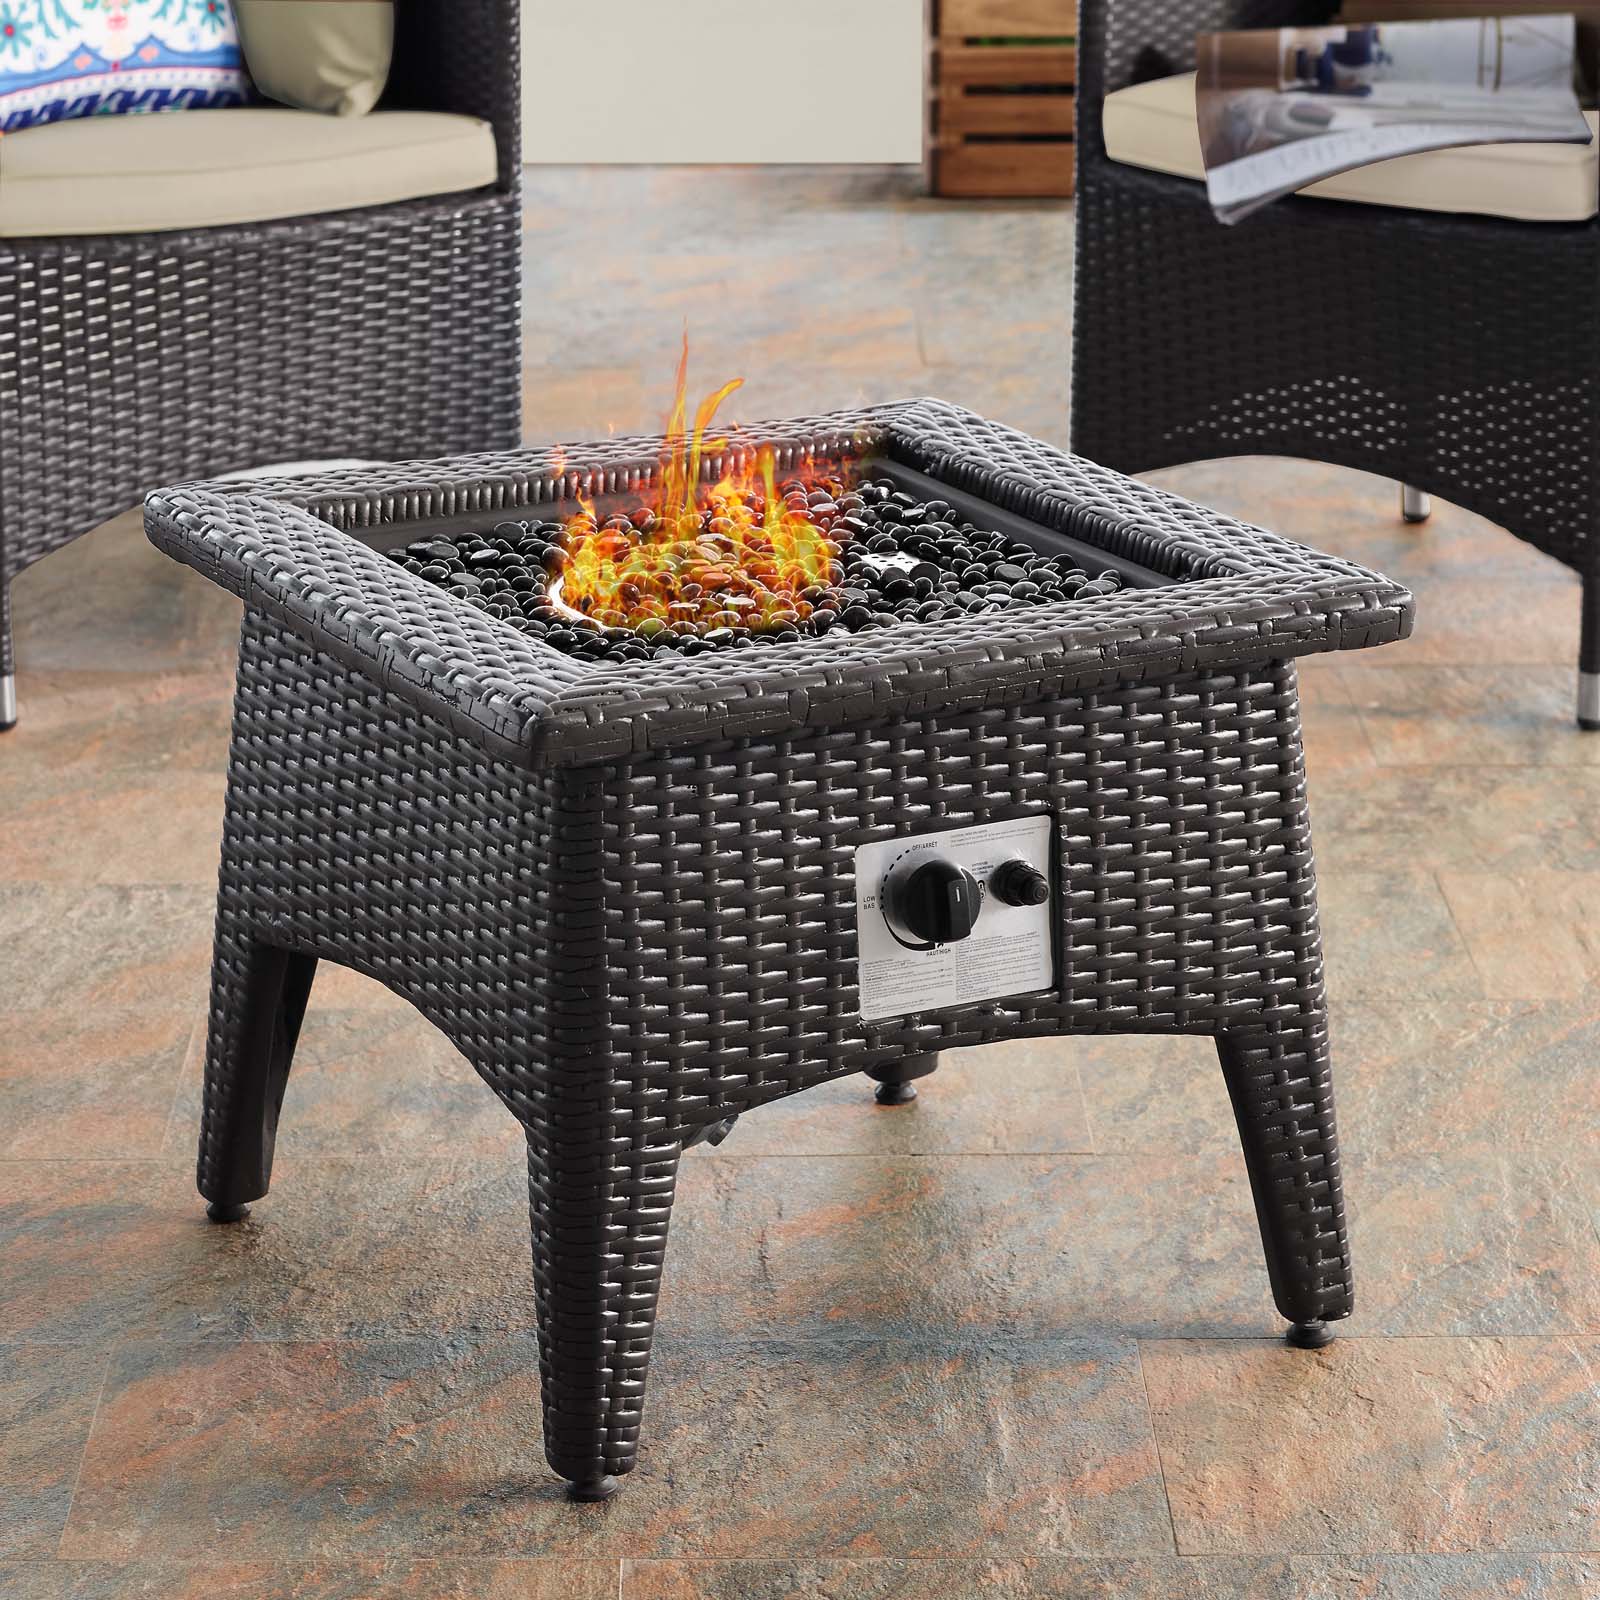 Modway Outdoor Dining Sets - Convene 3 Piece Set Outdoor Patio with Fire Pit Espresso Beige 71"